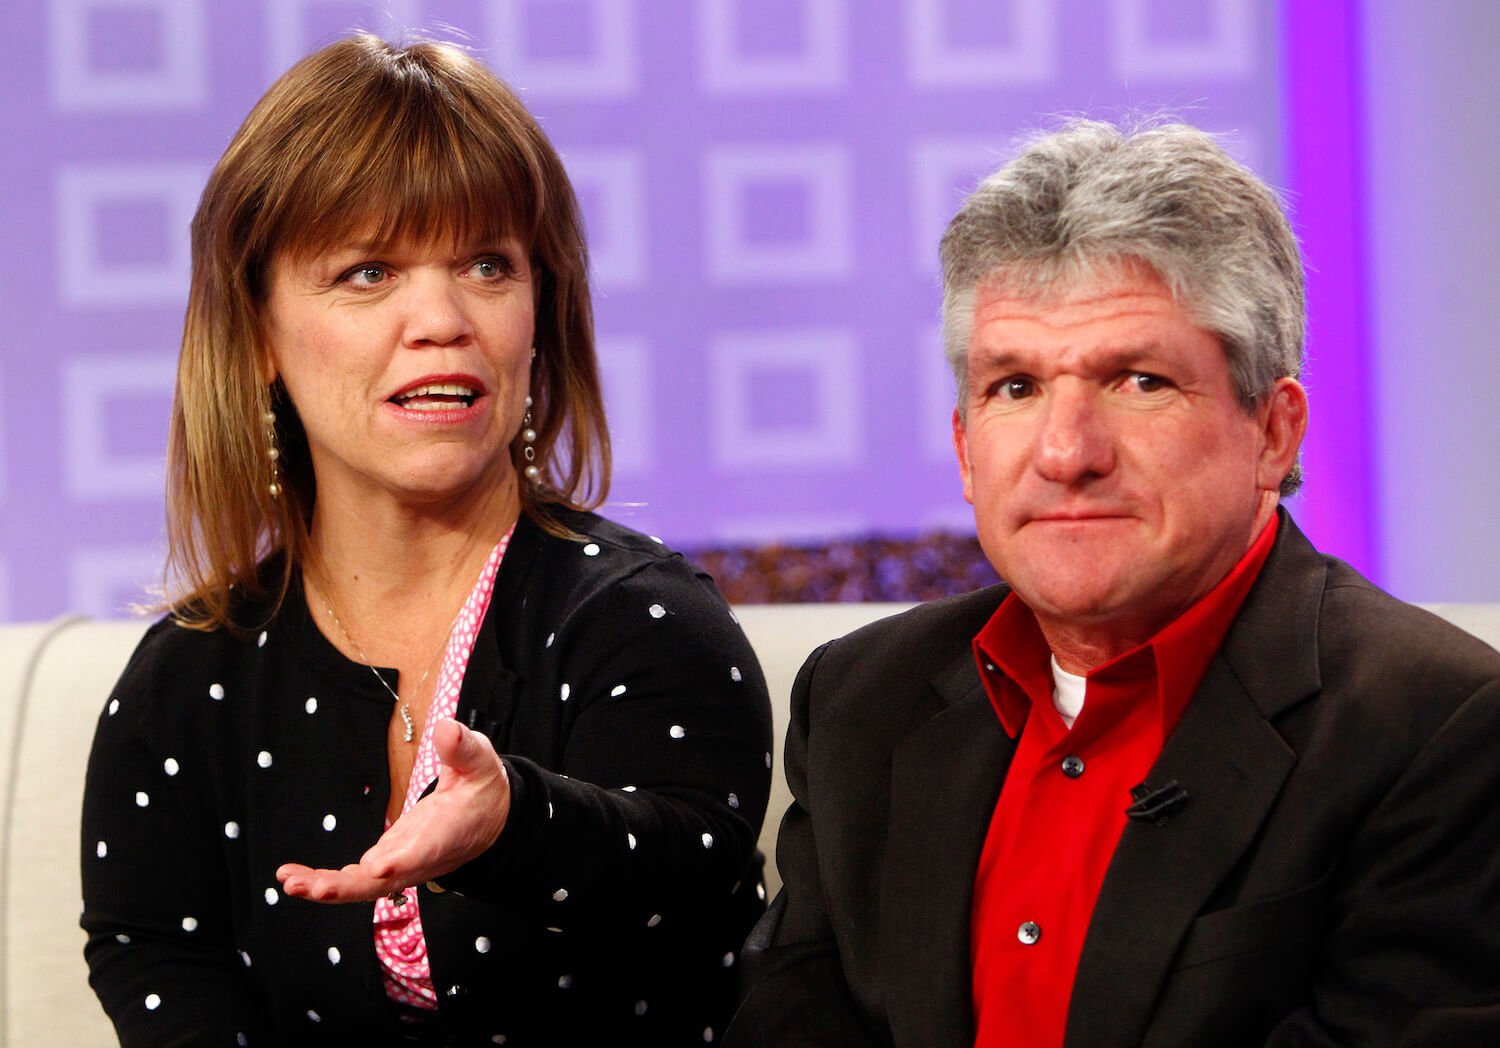 'Little People, Big World' Season 25 stars Matt and Amy Roloff sitting next to each other on a couch